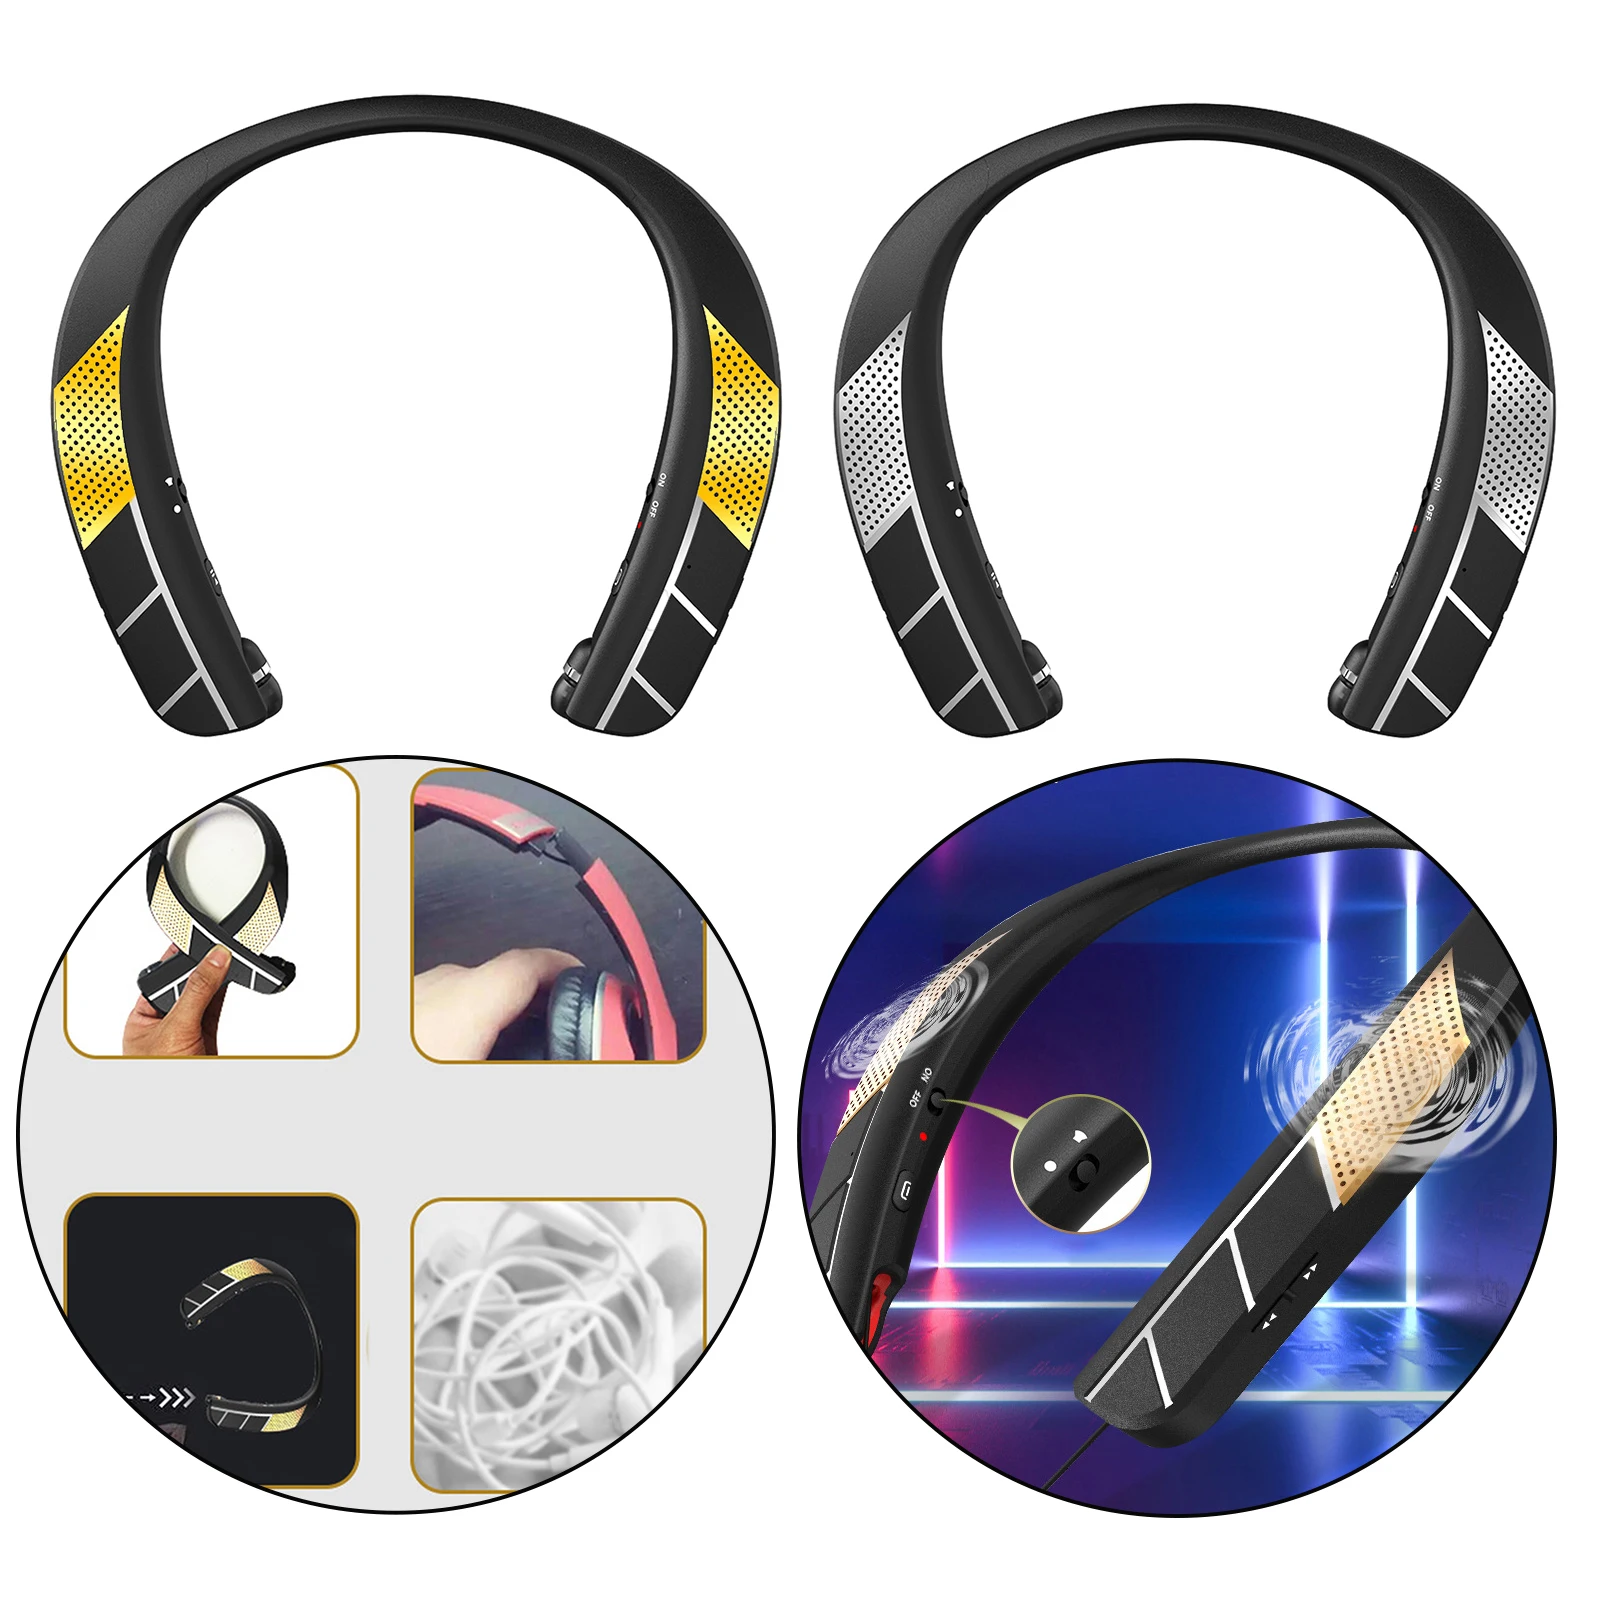 2 in 1 3D Surround Stereo Neckband Wireless Speaker Bluetooth w/ Retractable Earbuds Headphones Audio Portable Listen to Music